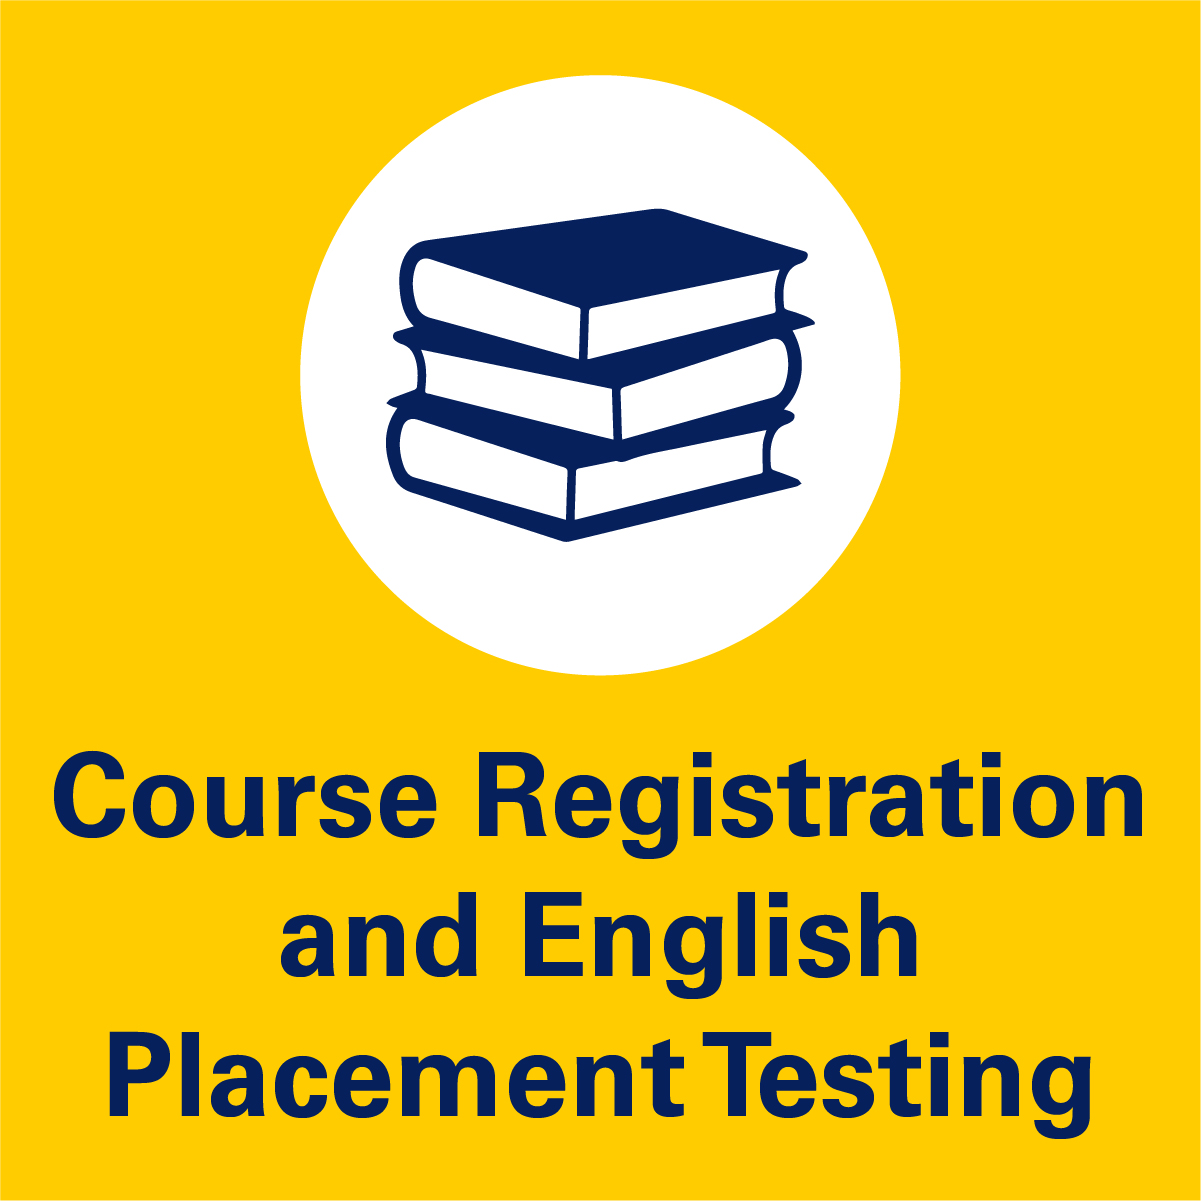 Course Registration and English Placement Testing